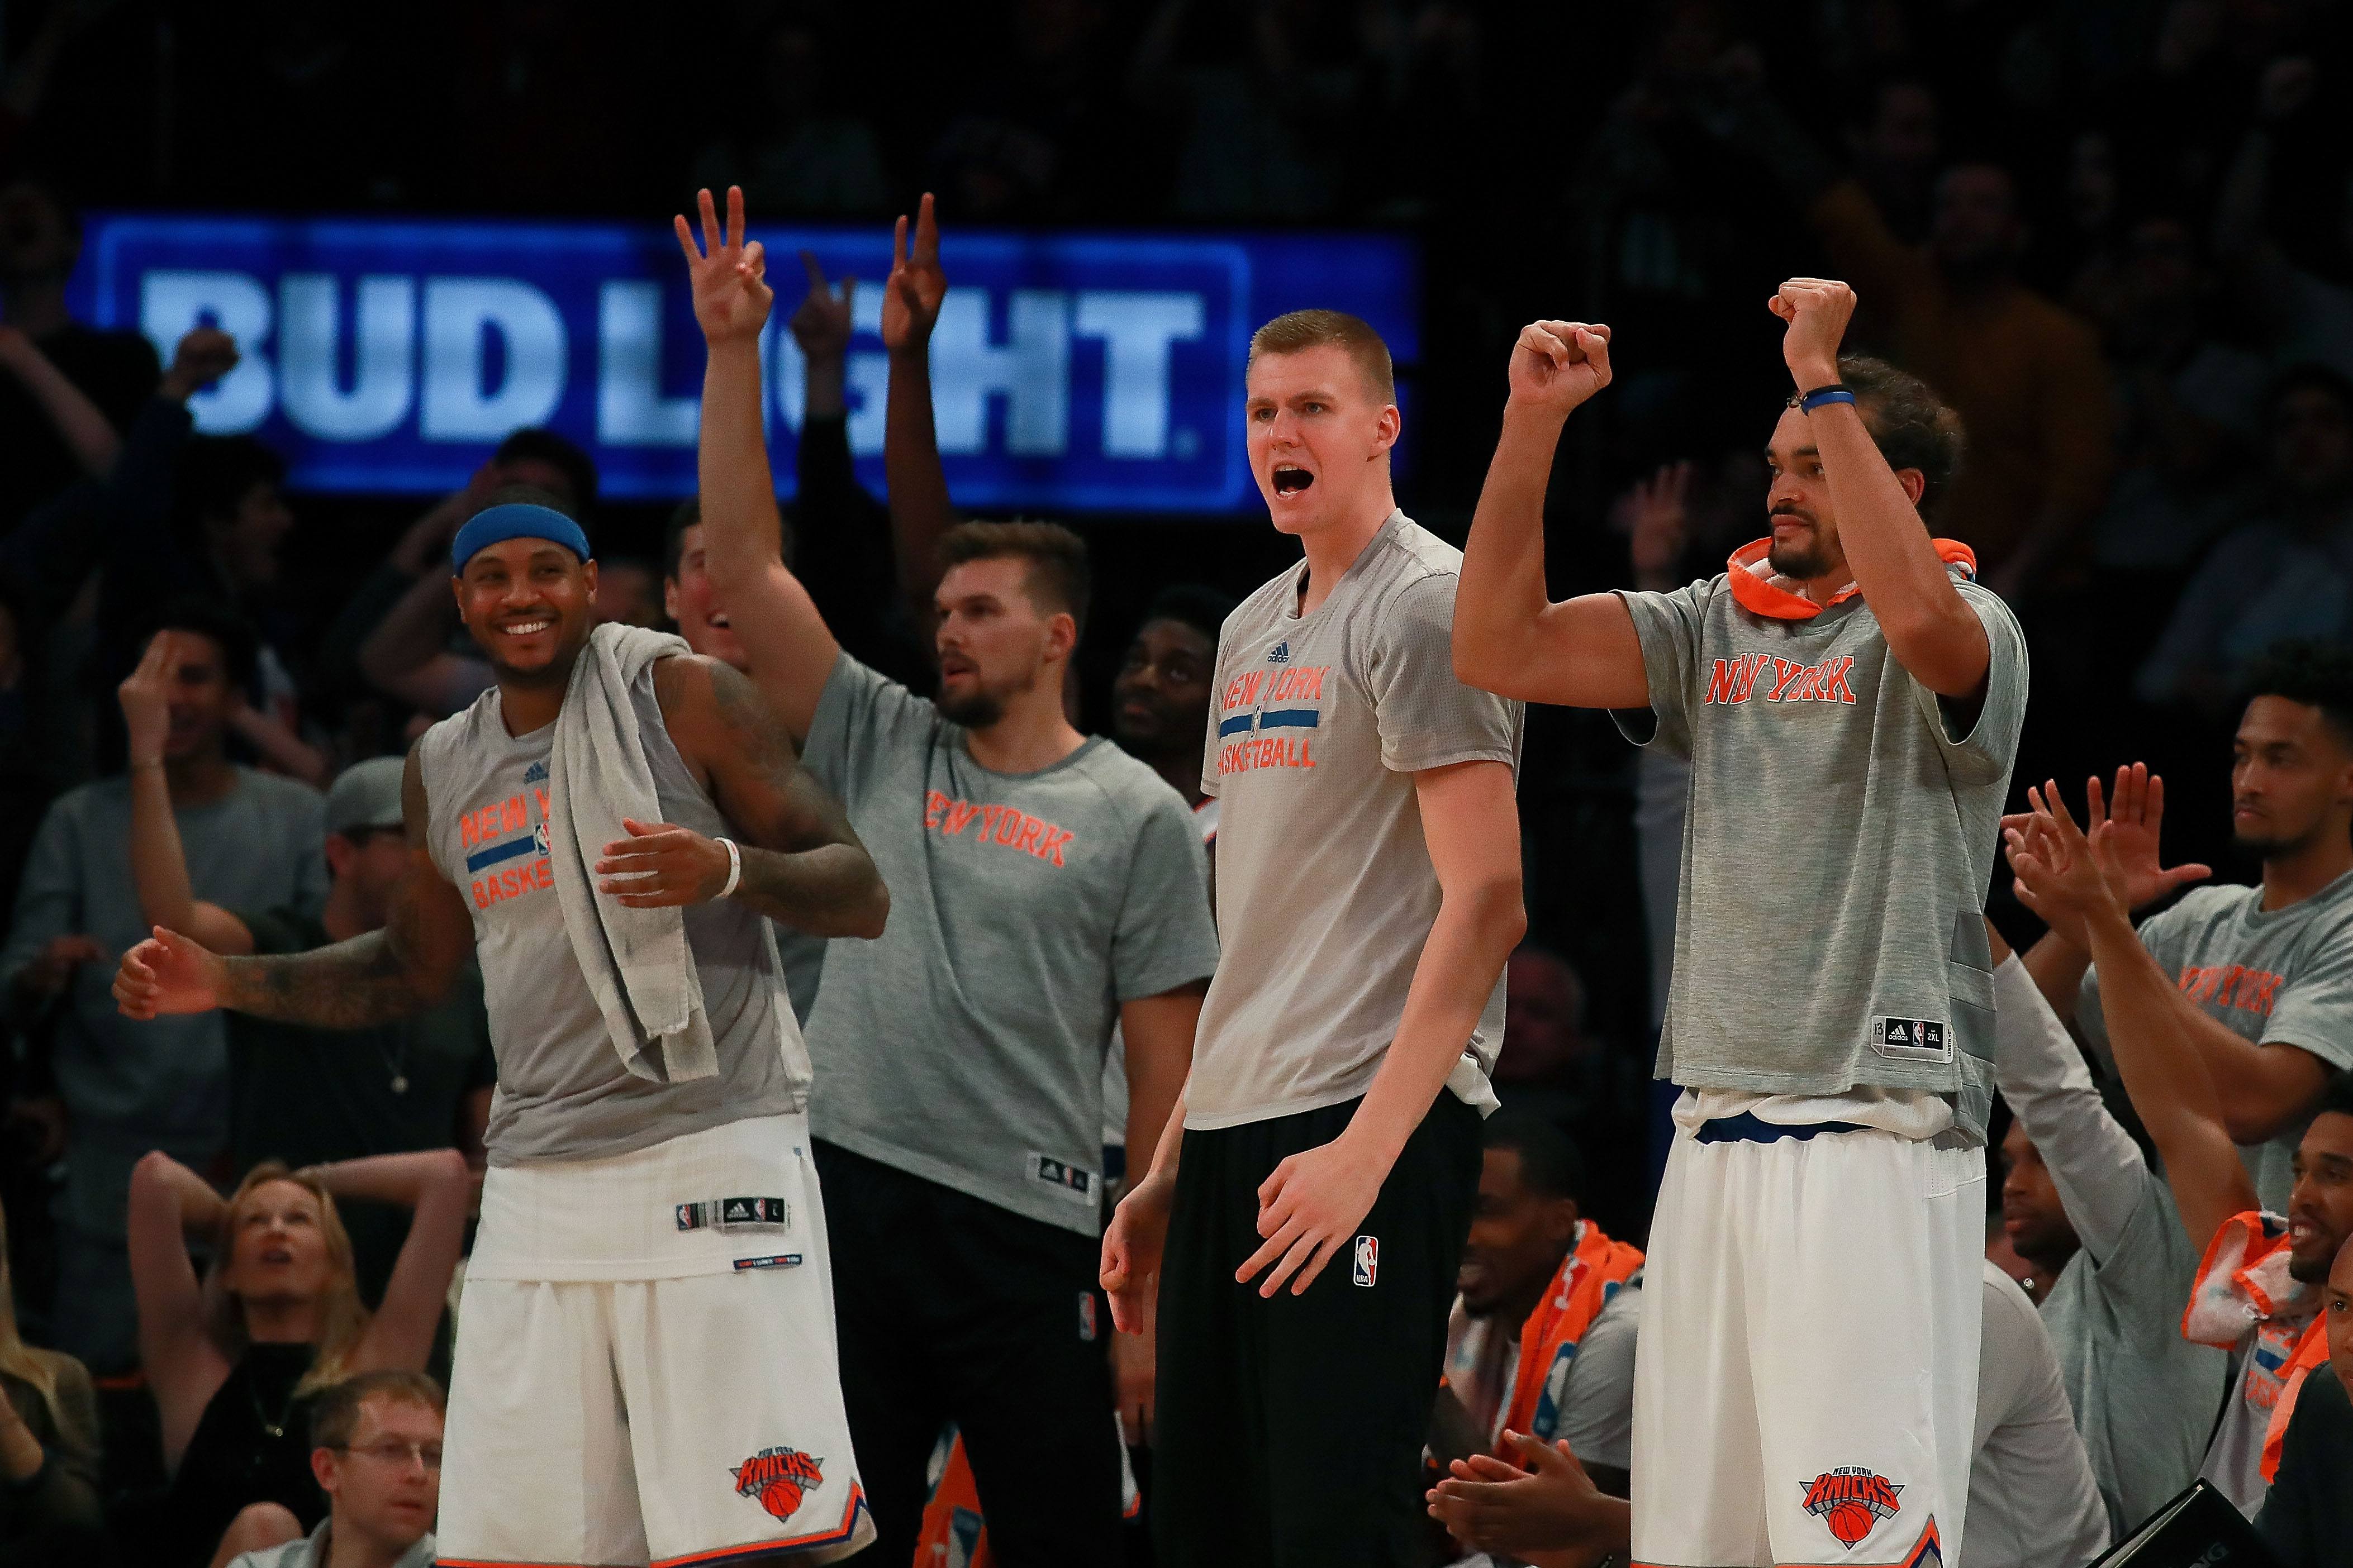 The Knicks cheer from the sidelines.